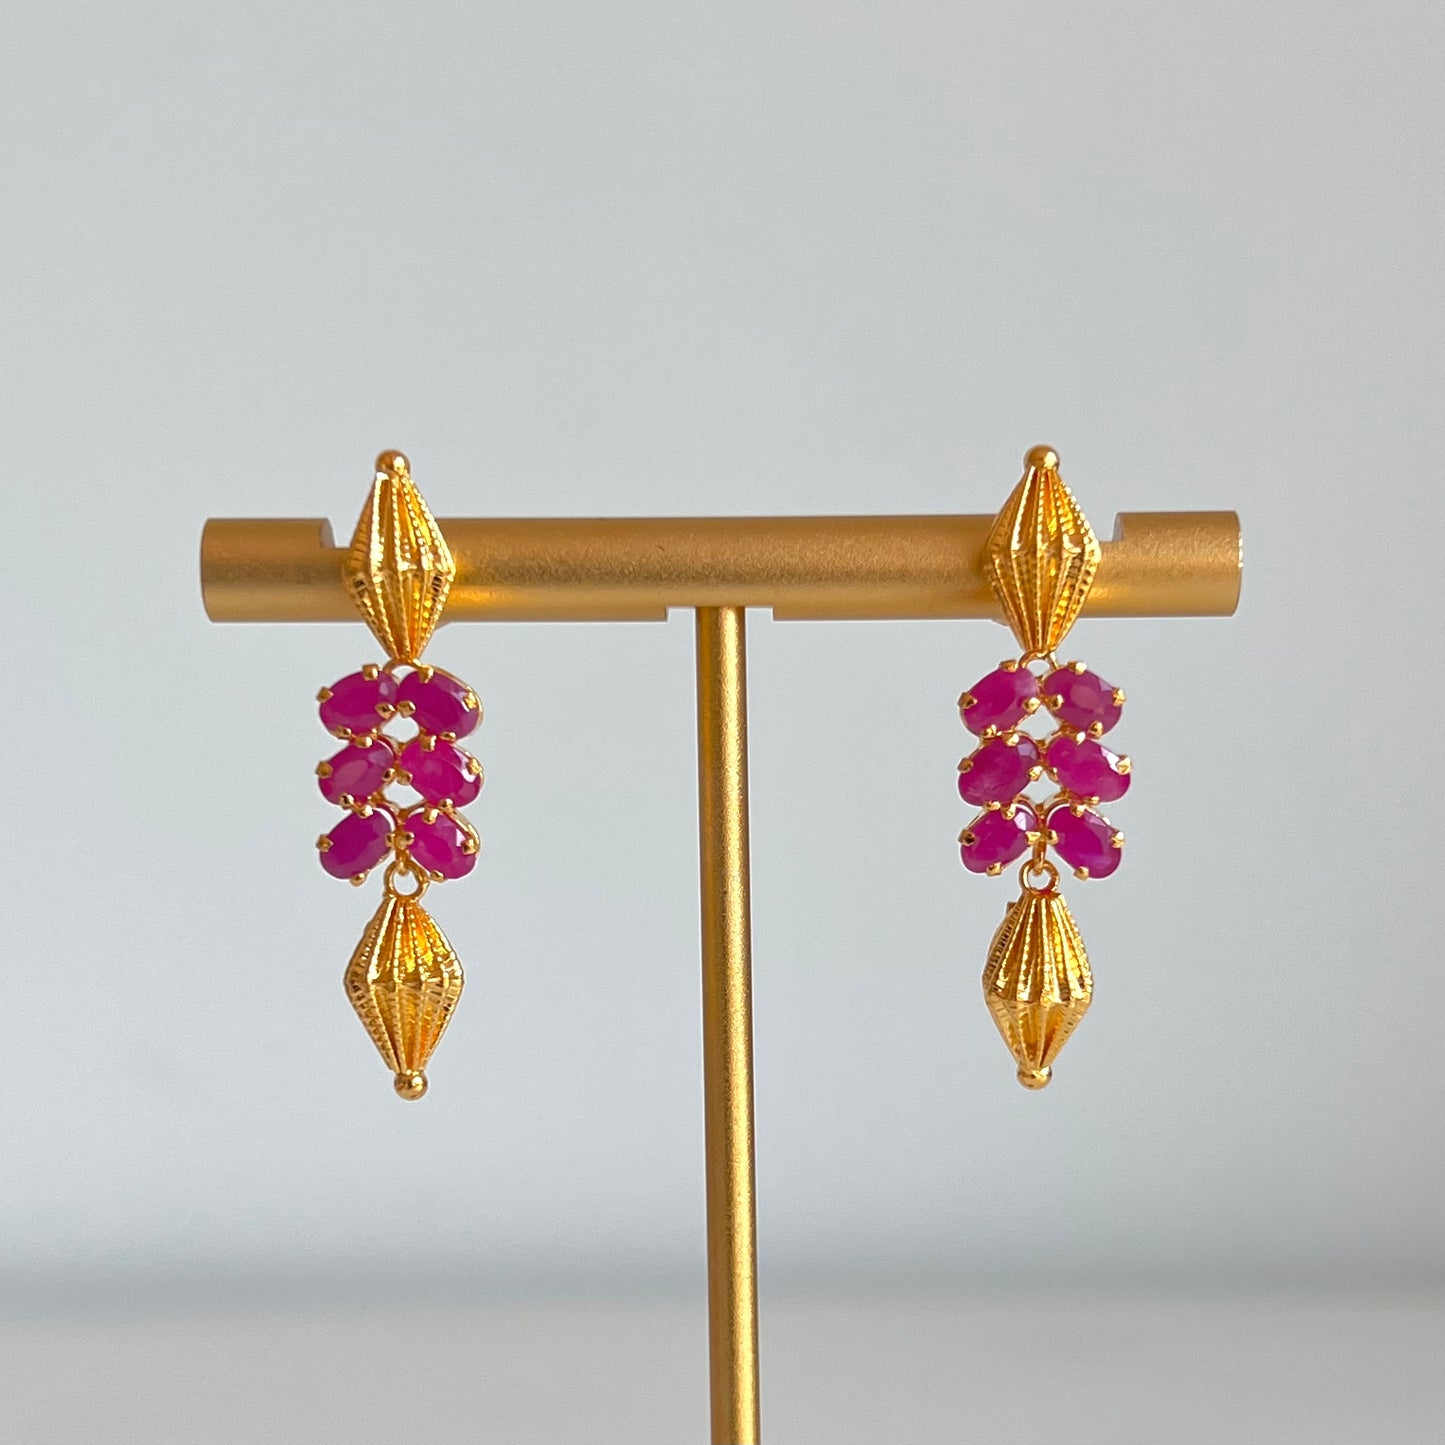 Brilliant Glossy Ruby Choker Design with Gold Rope-like Finishing